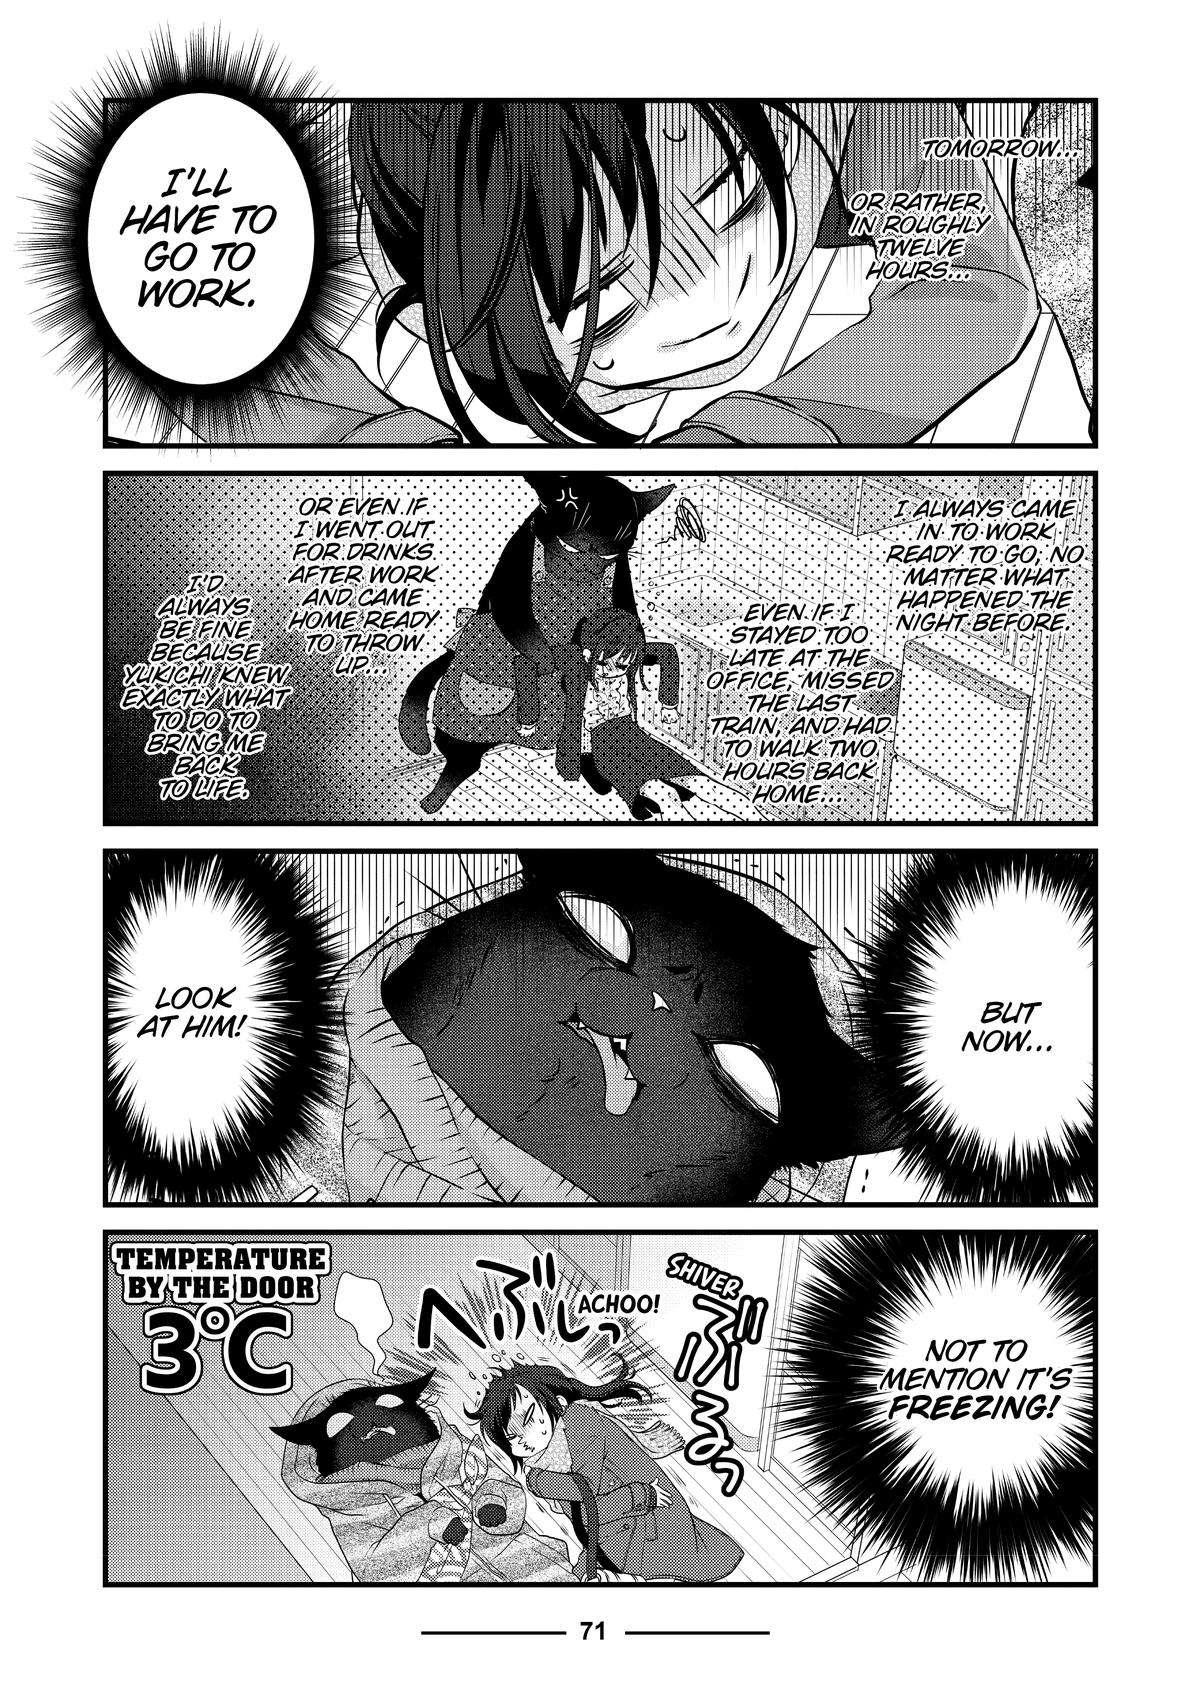 The Masterful Cat is Depressed Again Today - chapter 52 - #3